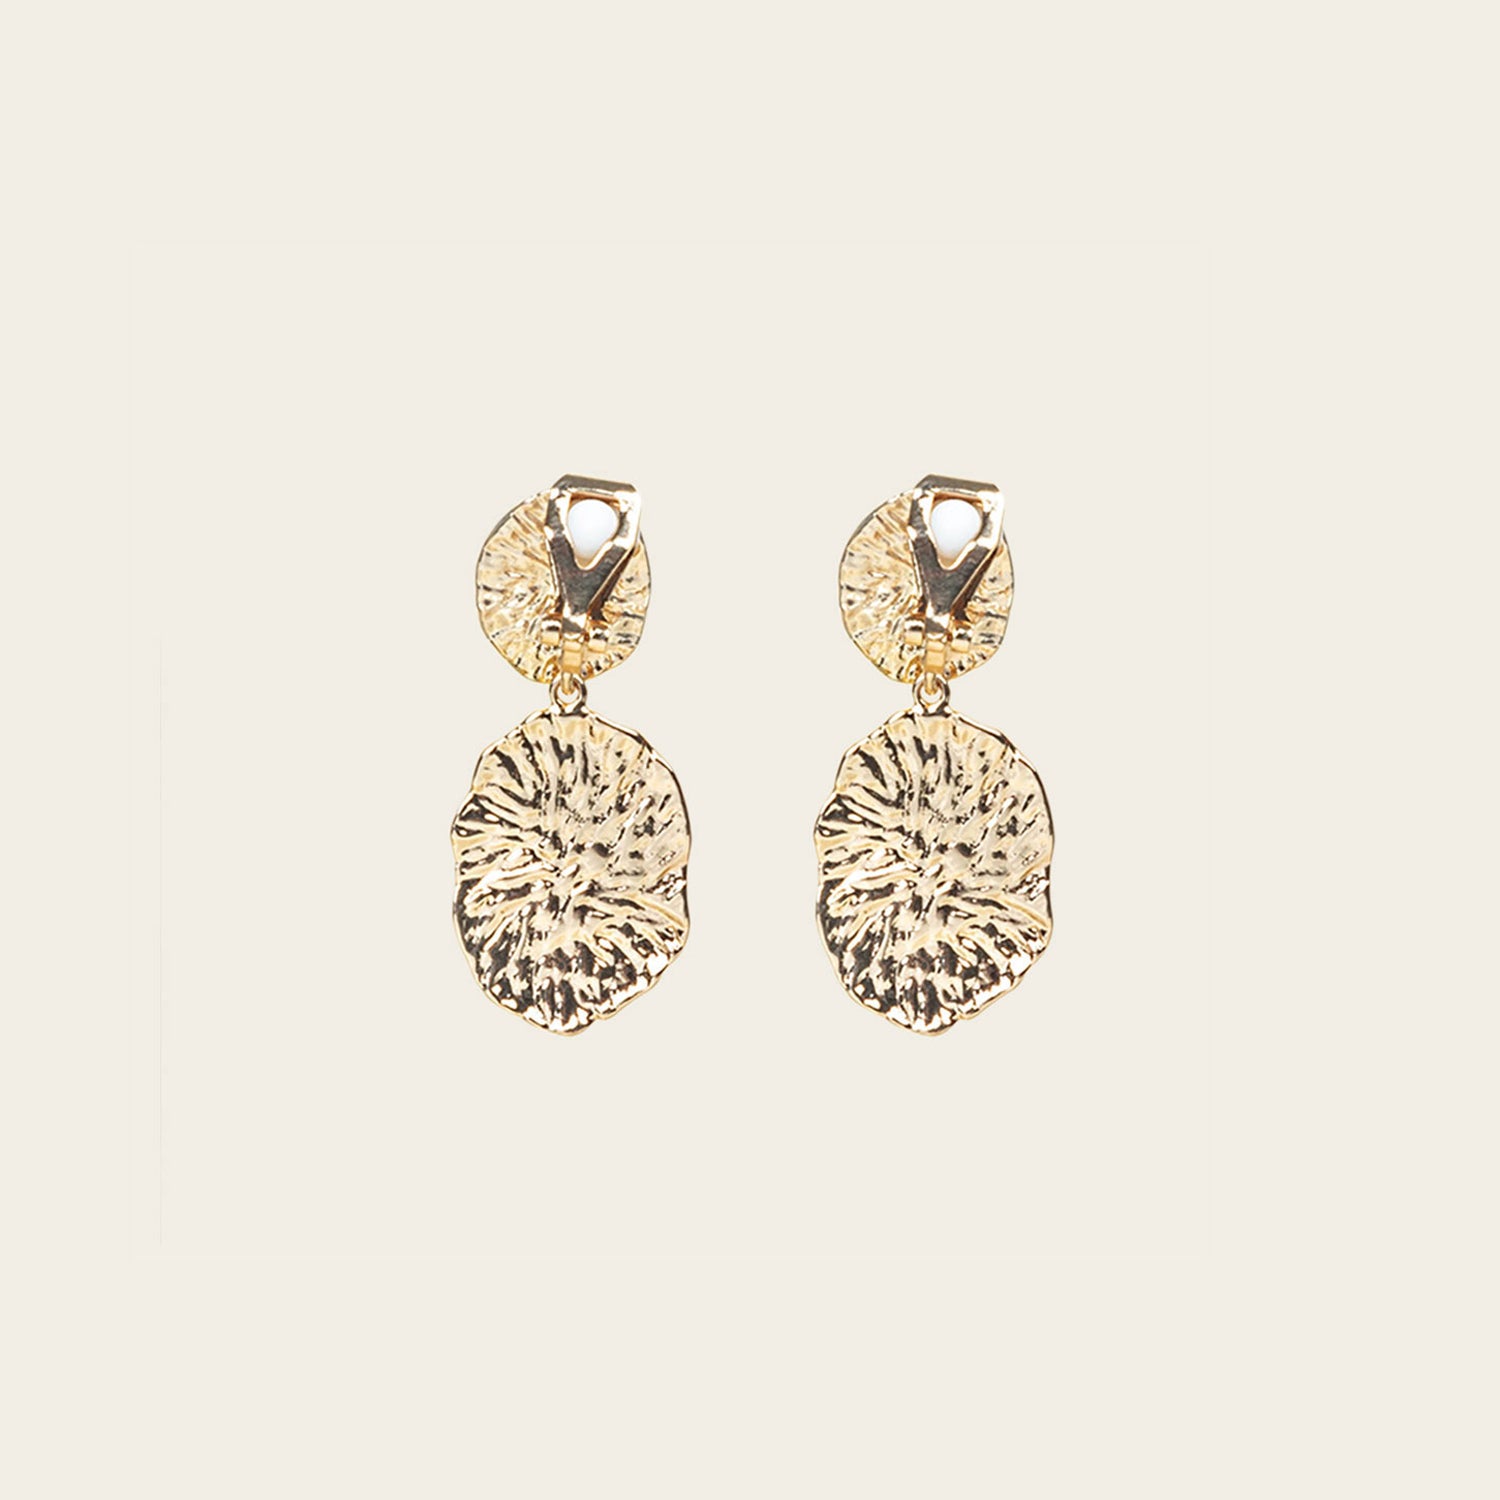 Image of the Daiquiri Drop Clip On Earrings in Gold feature a secure, padded clip-on closure ideal for all ear types, offering up to 12 hours of comfortable wear. Crafted from Zinc and Copper alloy, these earrings come as a single pair with removable rubber padding.